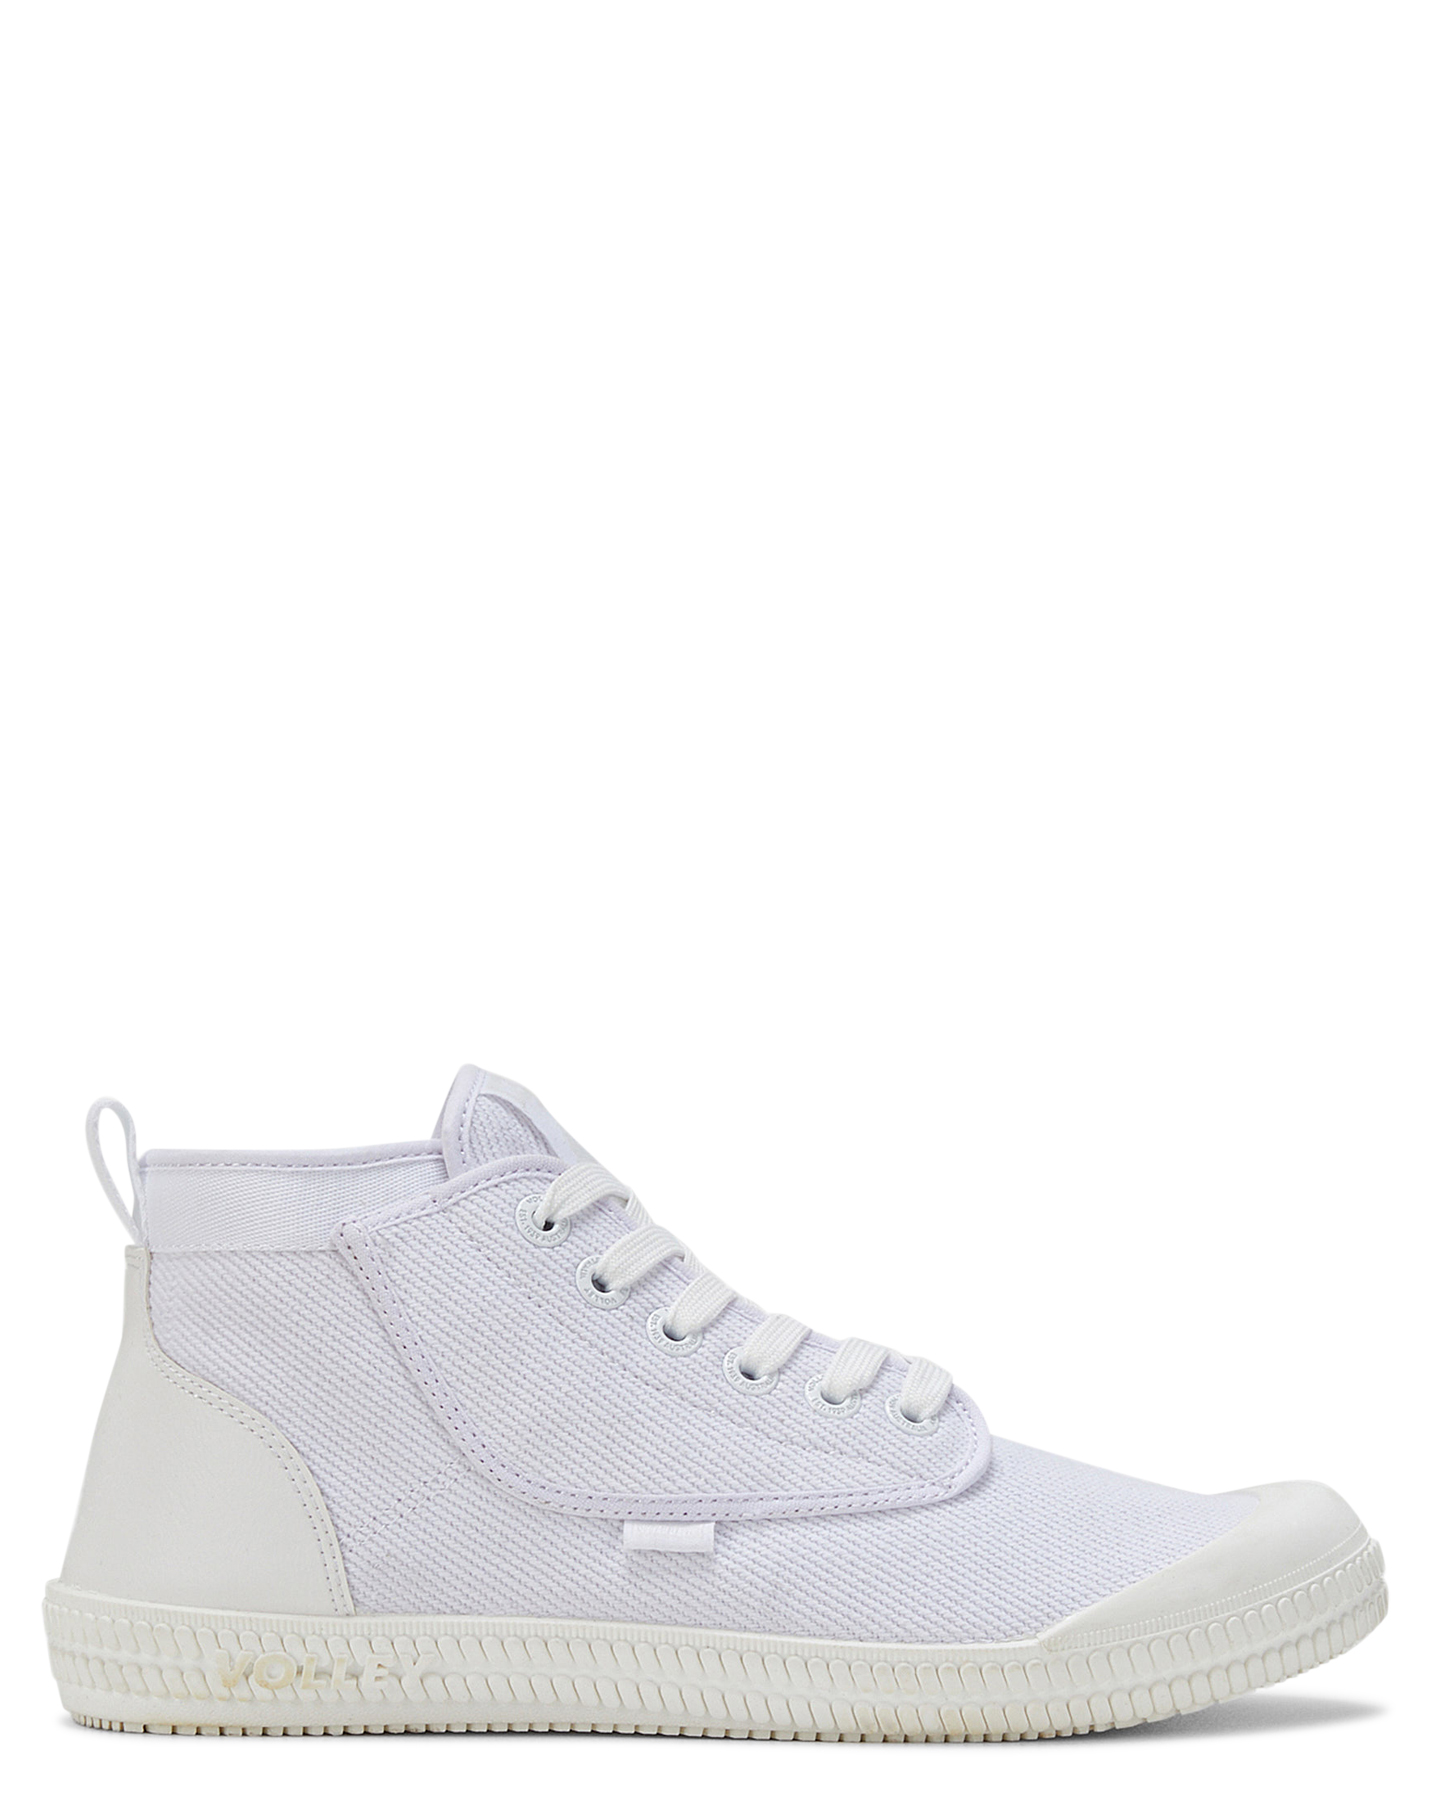 Volley Womens Heritage High Top Shoe - White White | SurfStitch